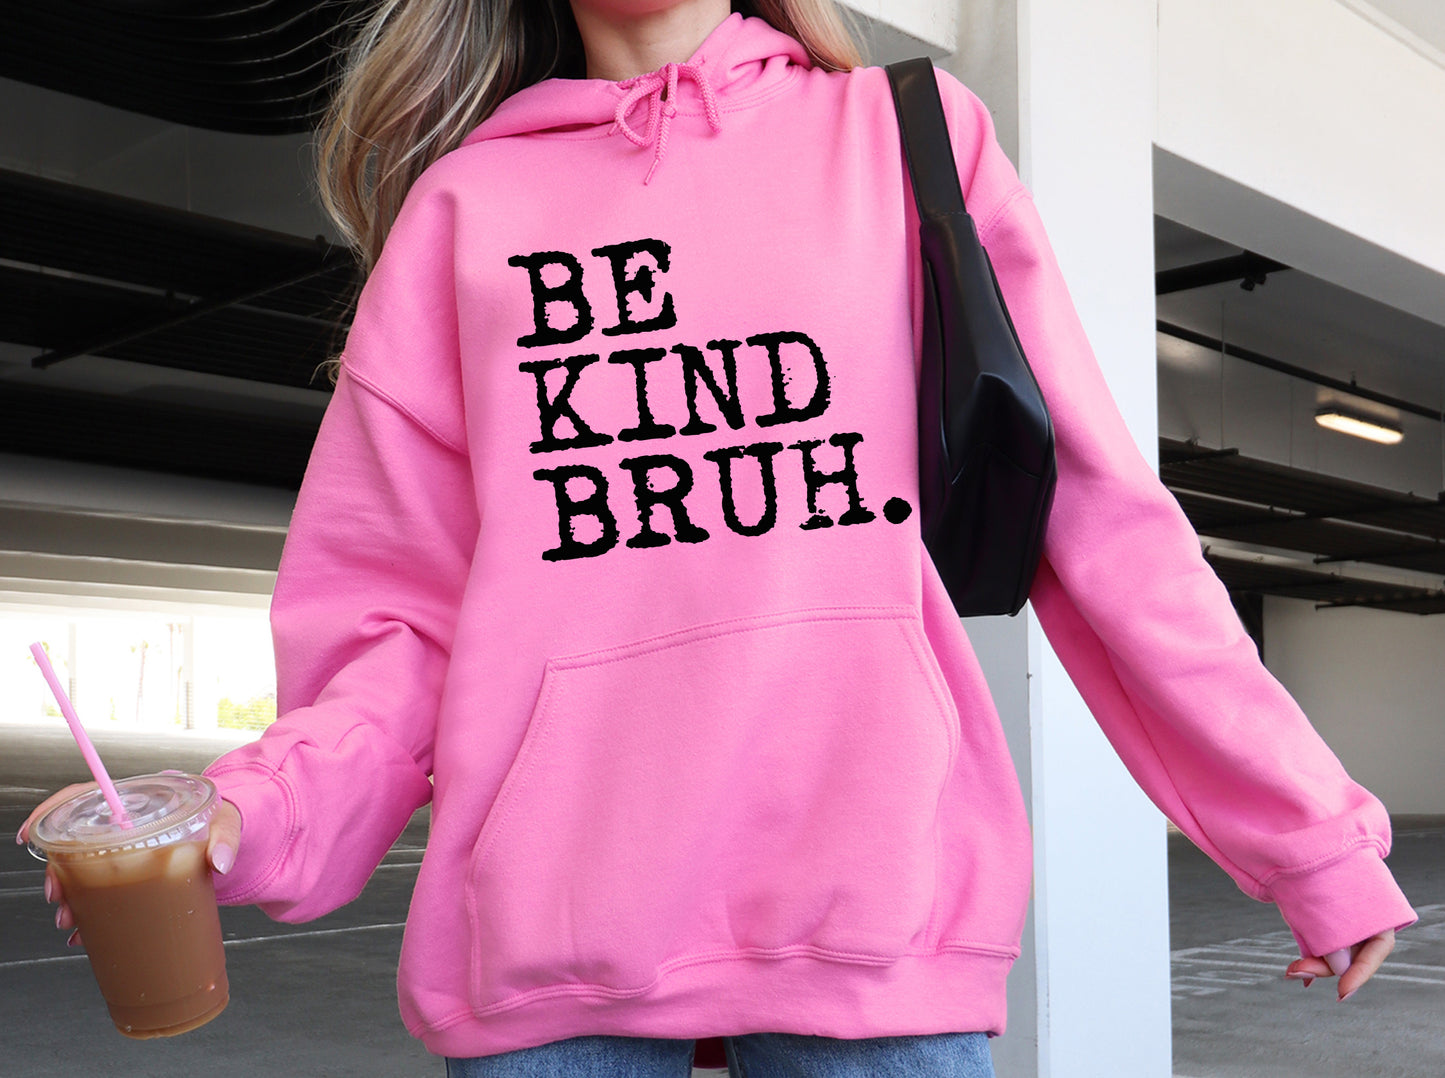 BE KIND BRUH